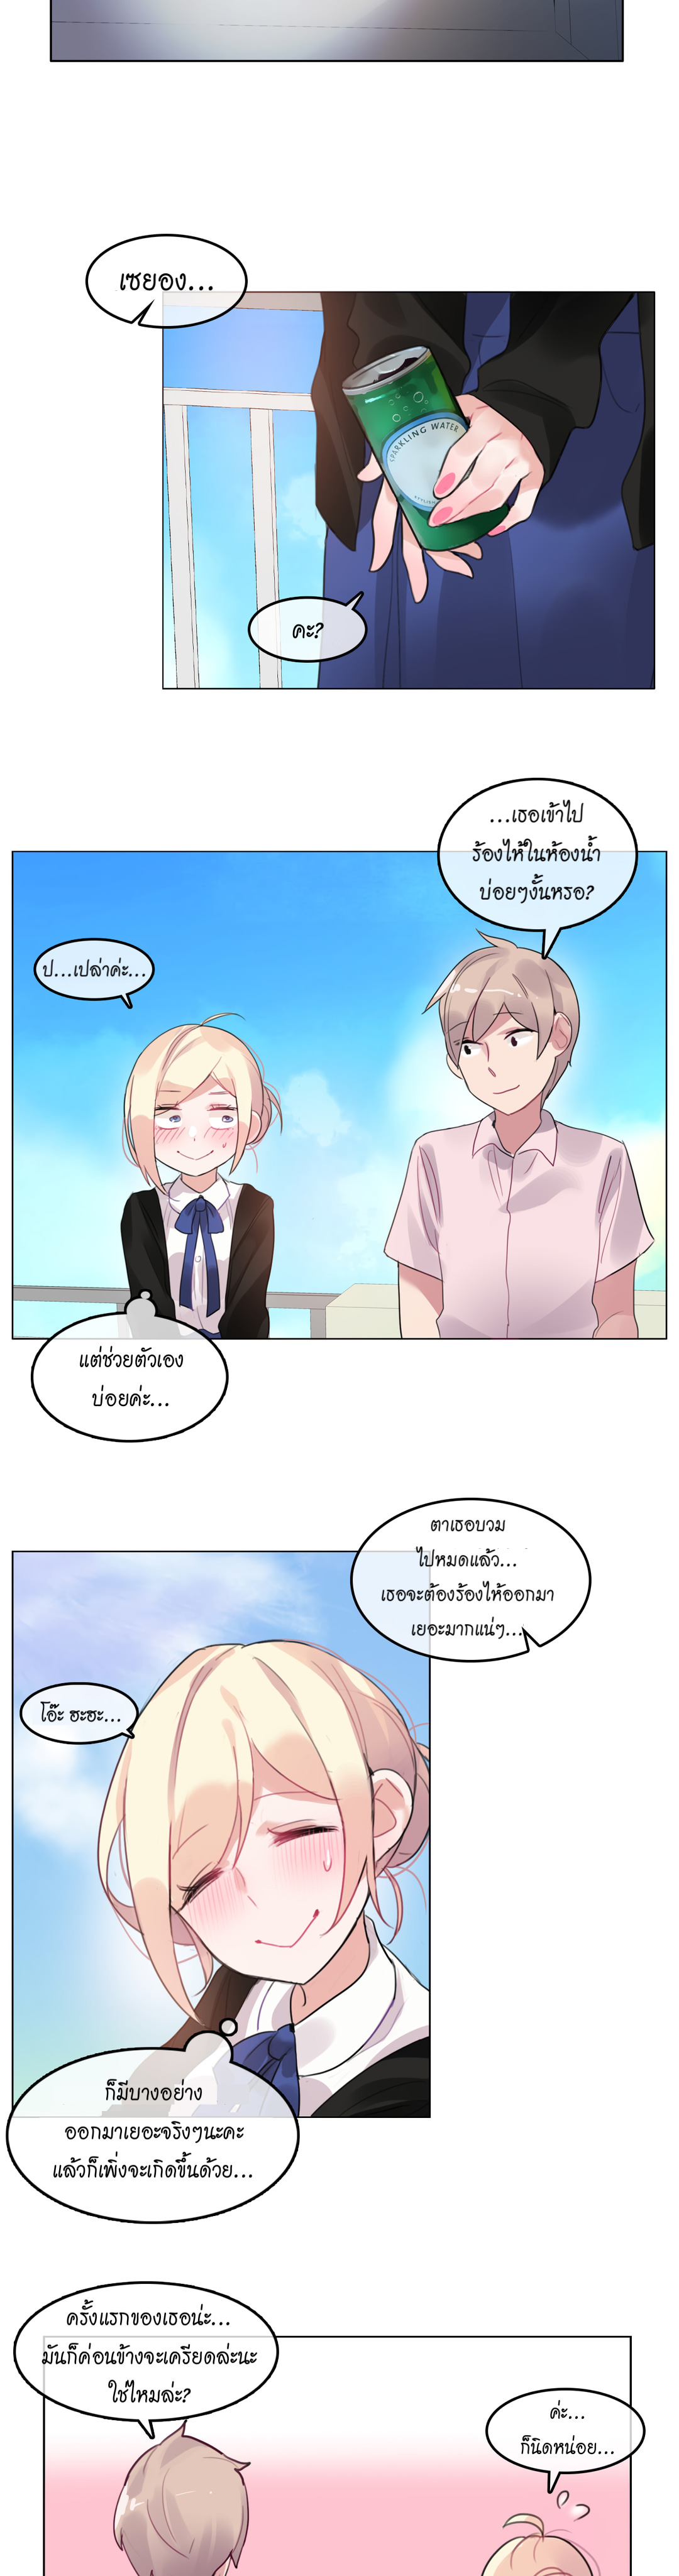 A Pervert’s Daily Life49 (14)